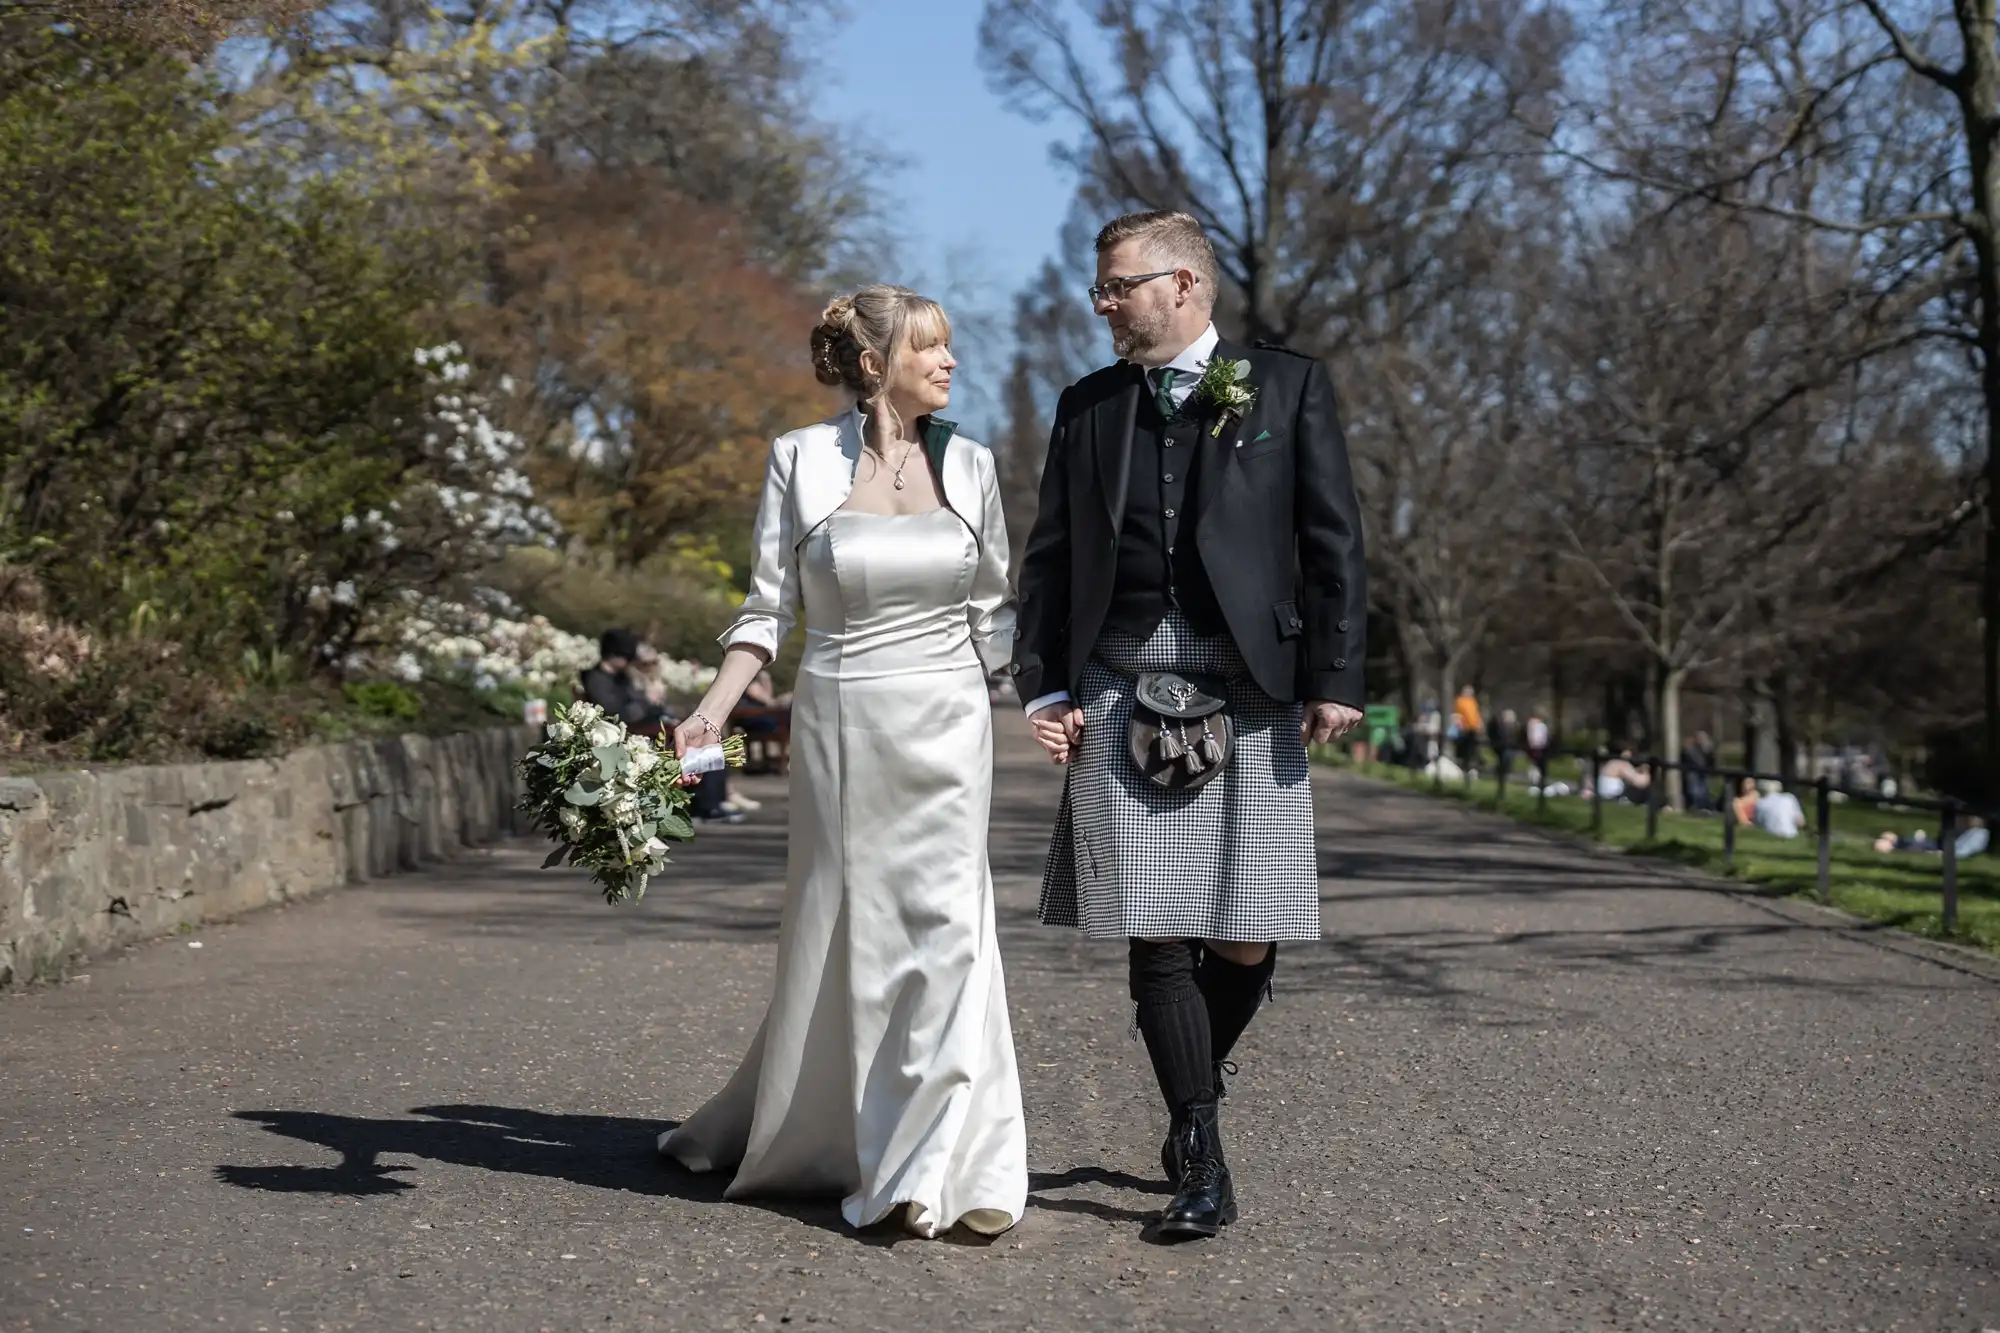 wedding photographer at the Caledonian Hotel: a bride in a white satin dress and groom in a kilt walk hand-in-hand along a park path on a sunny day.